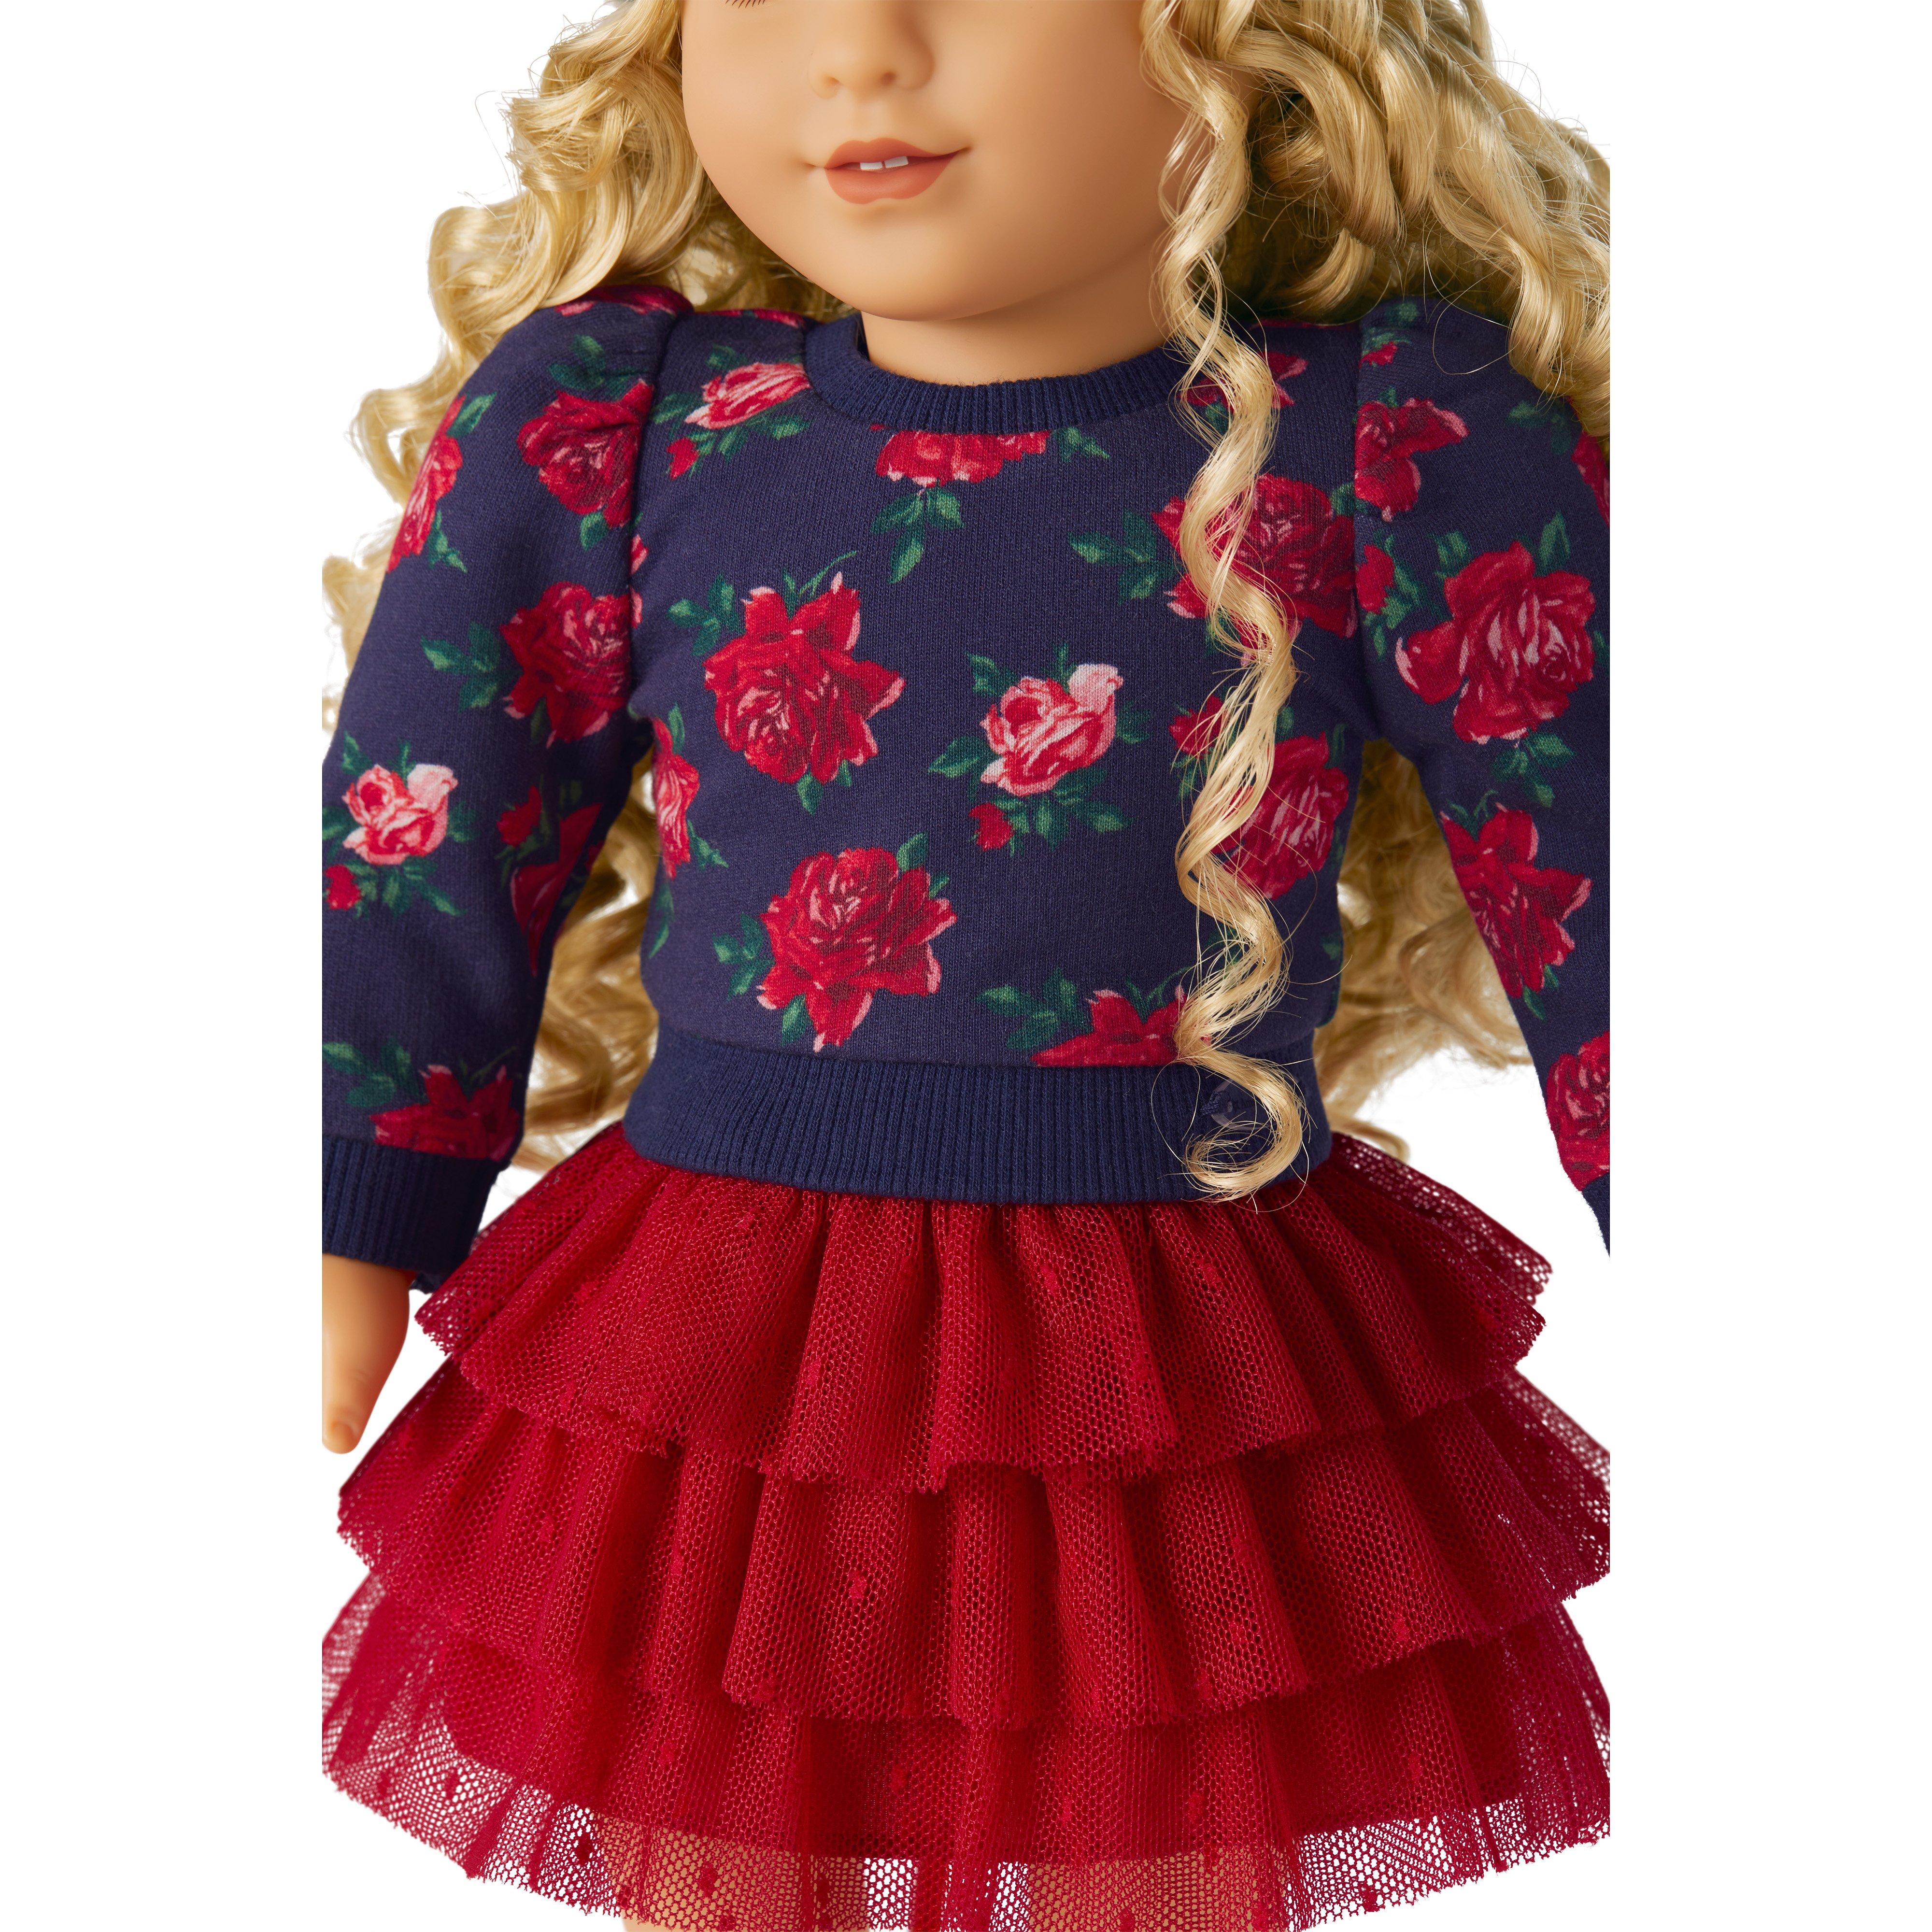 American Girl® x Janie And Jack Wrapped in Roses Top For Dolls image number 1